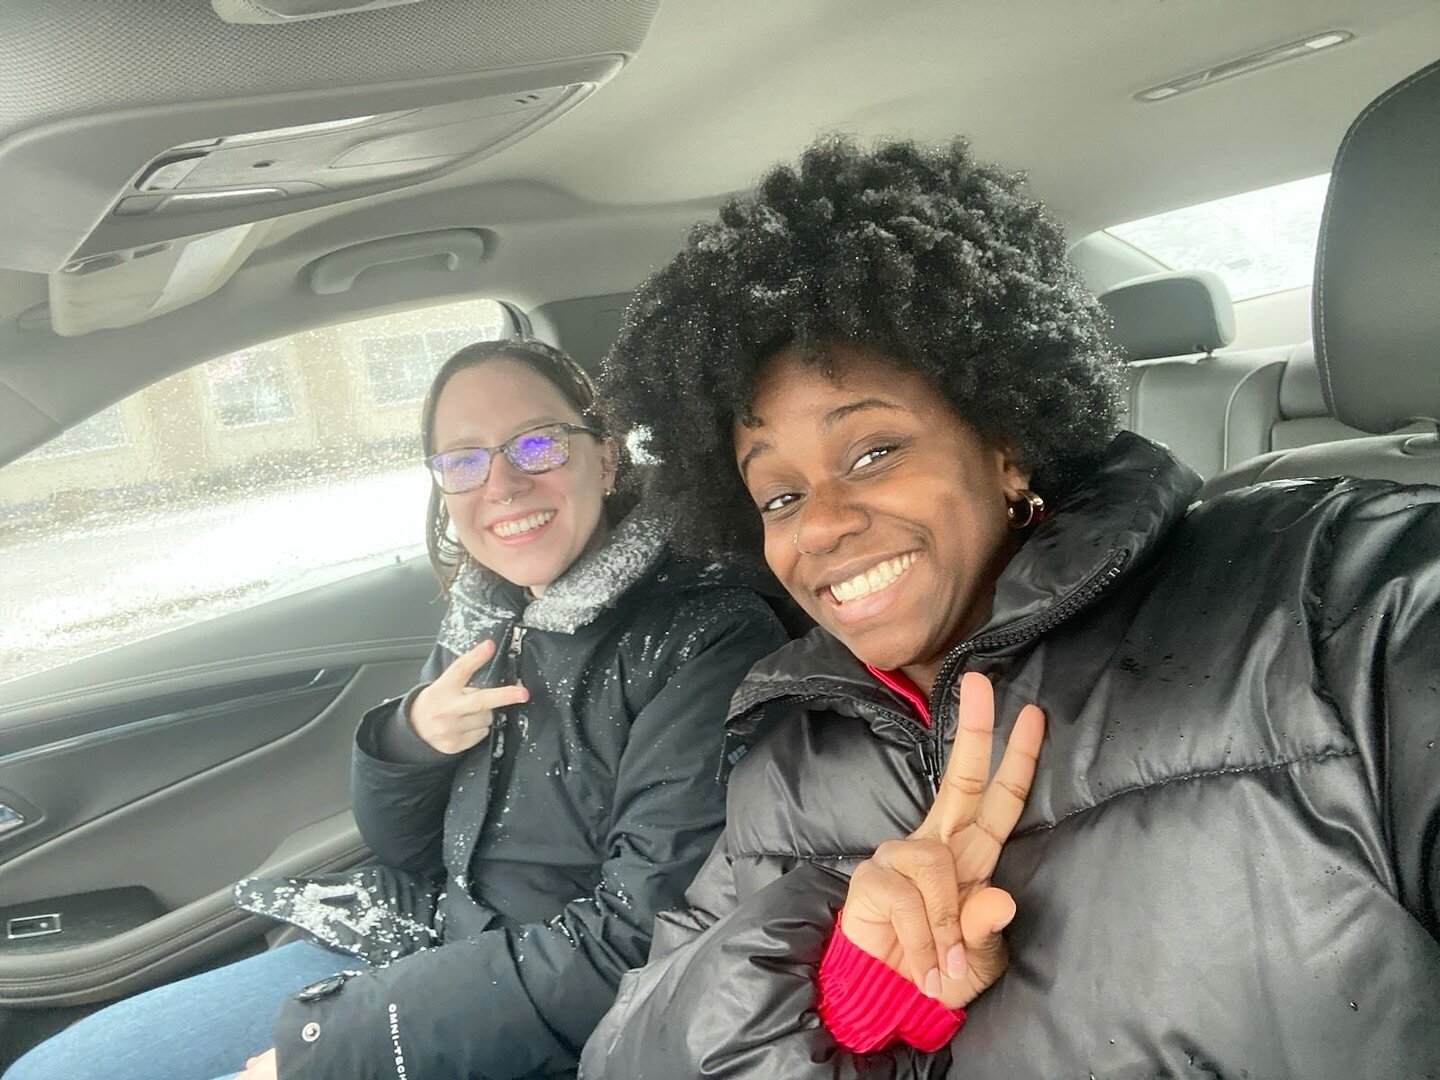 Happy Snowy Day from our outreach team! Similar to the US Postal Service, neither snow, nor rain, will keep our outreach team from the swift completion of our outreach services! ❄️☃️

#snowfay #snowstorm #outreachrelationshipsequalresults #communityc